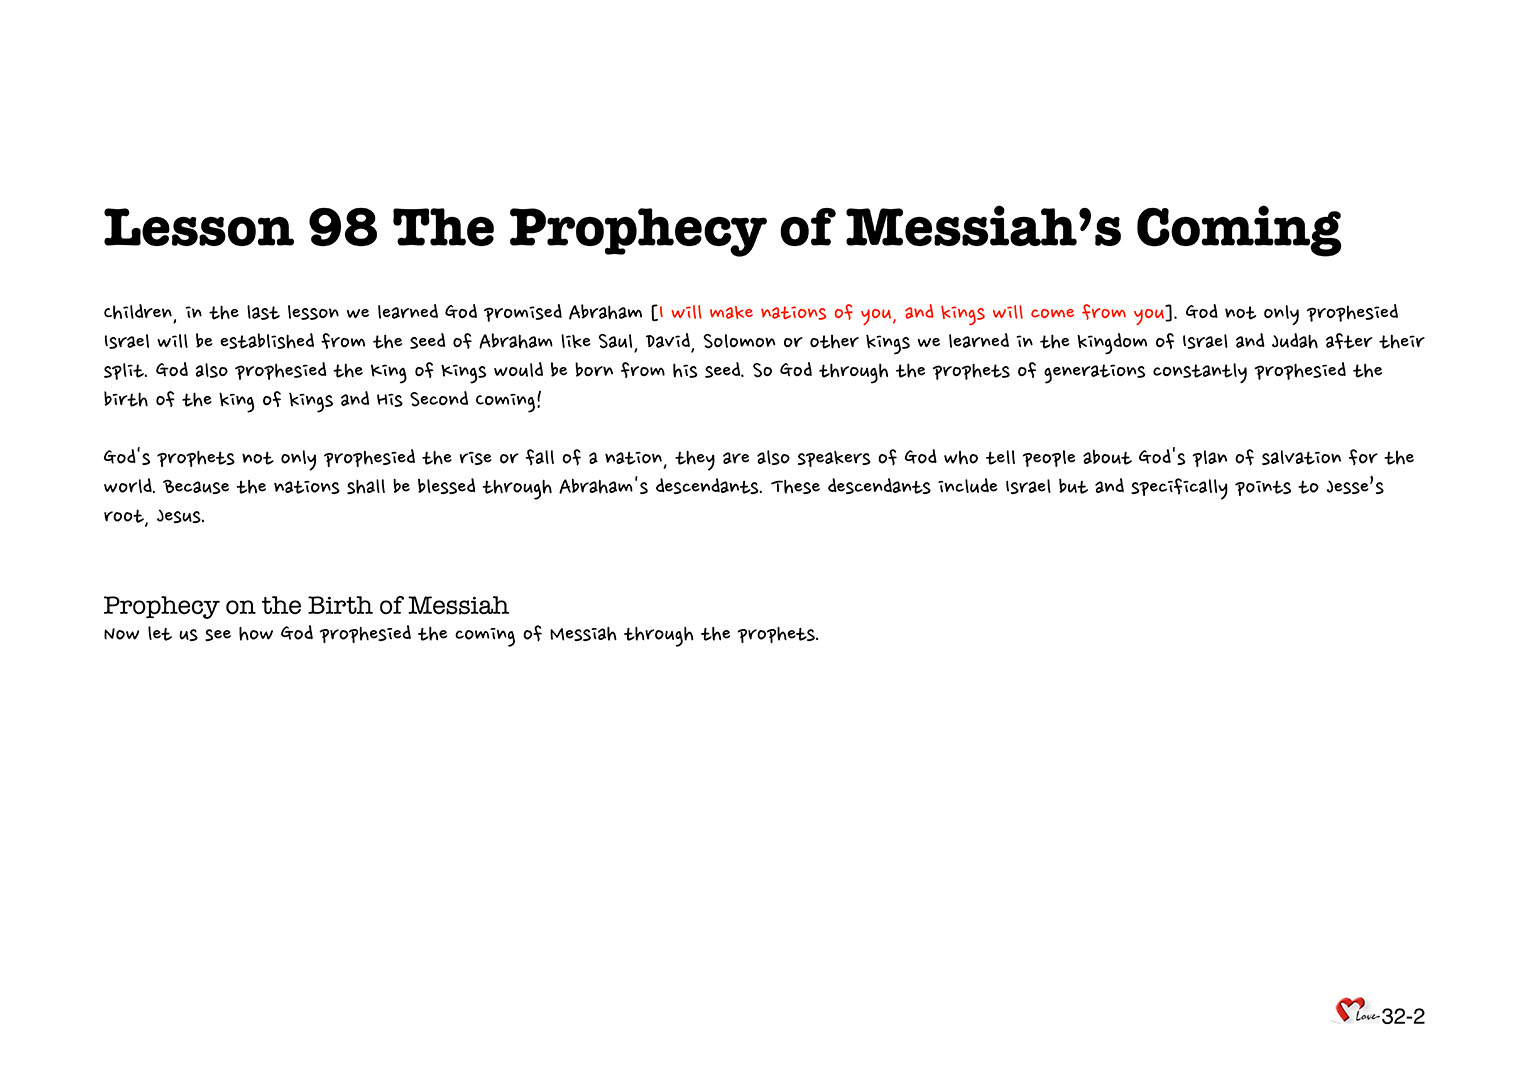 Chapter 32 - Lesson 98 - The Prophecy of Messiah’s Coming